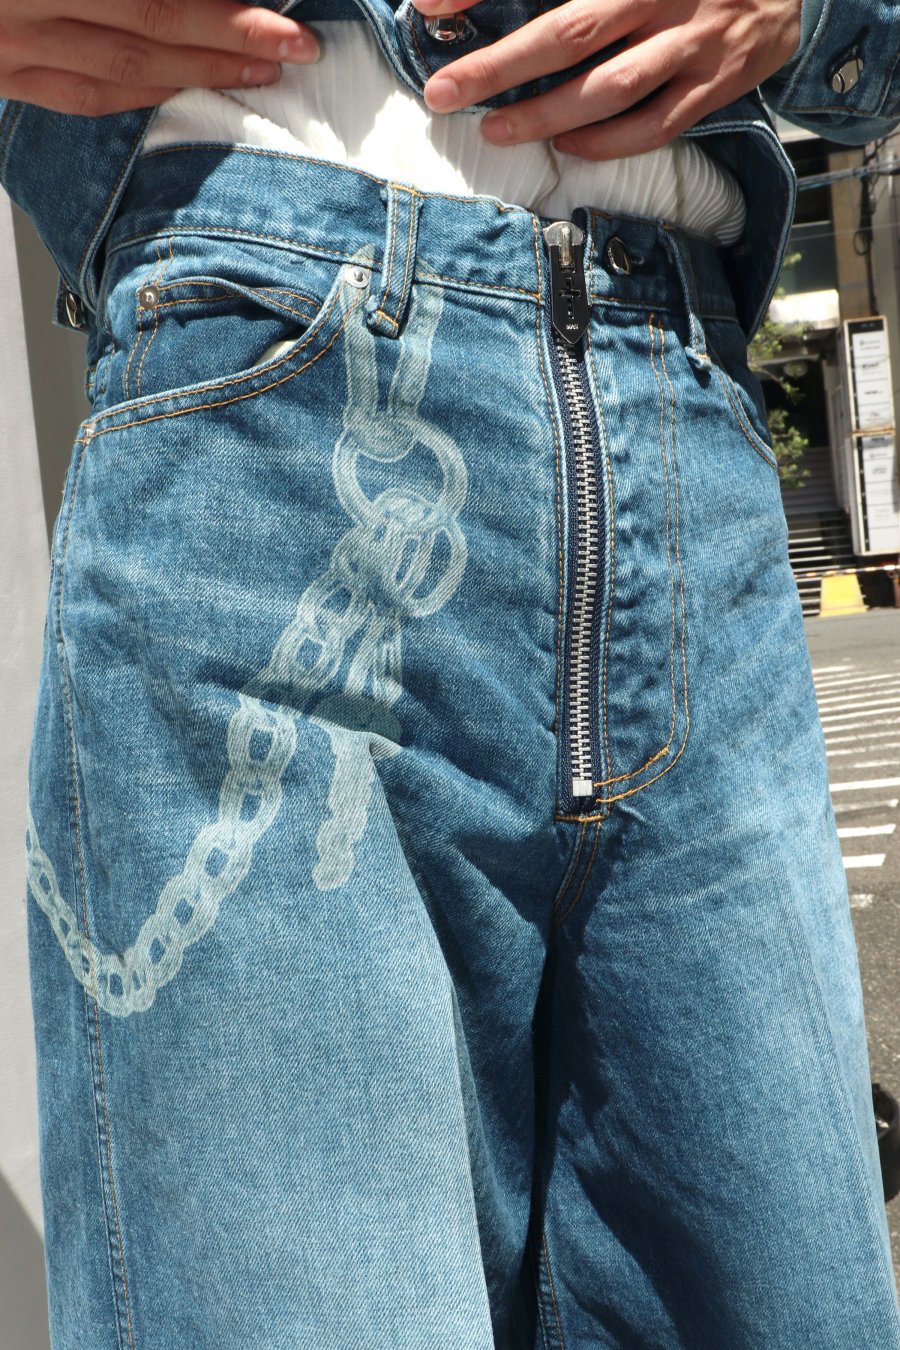 MASU（エムエーエスユー）のBAGGY FIT JEANS WALLET CHAINの通販サイト 